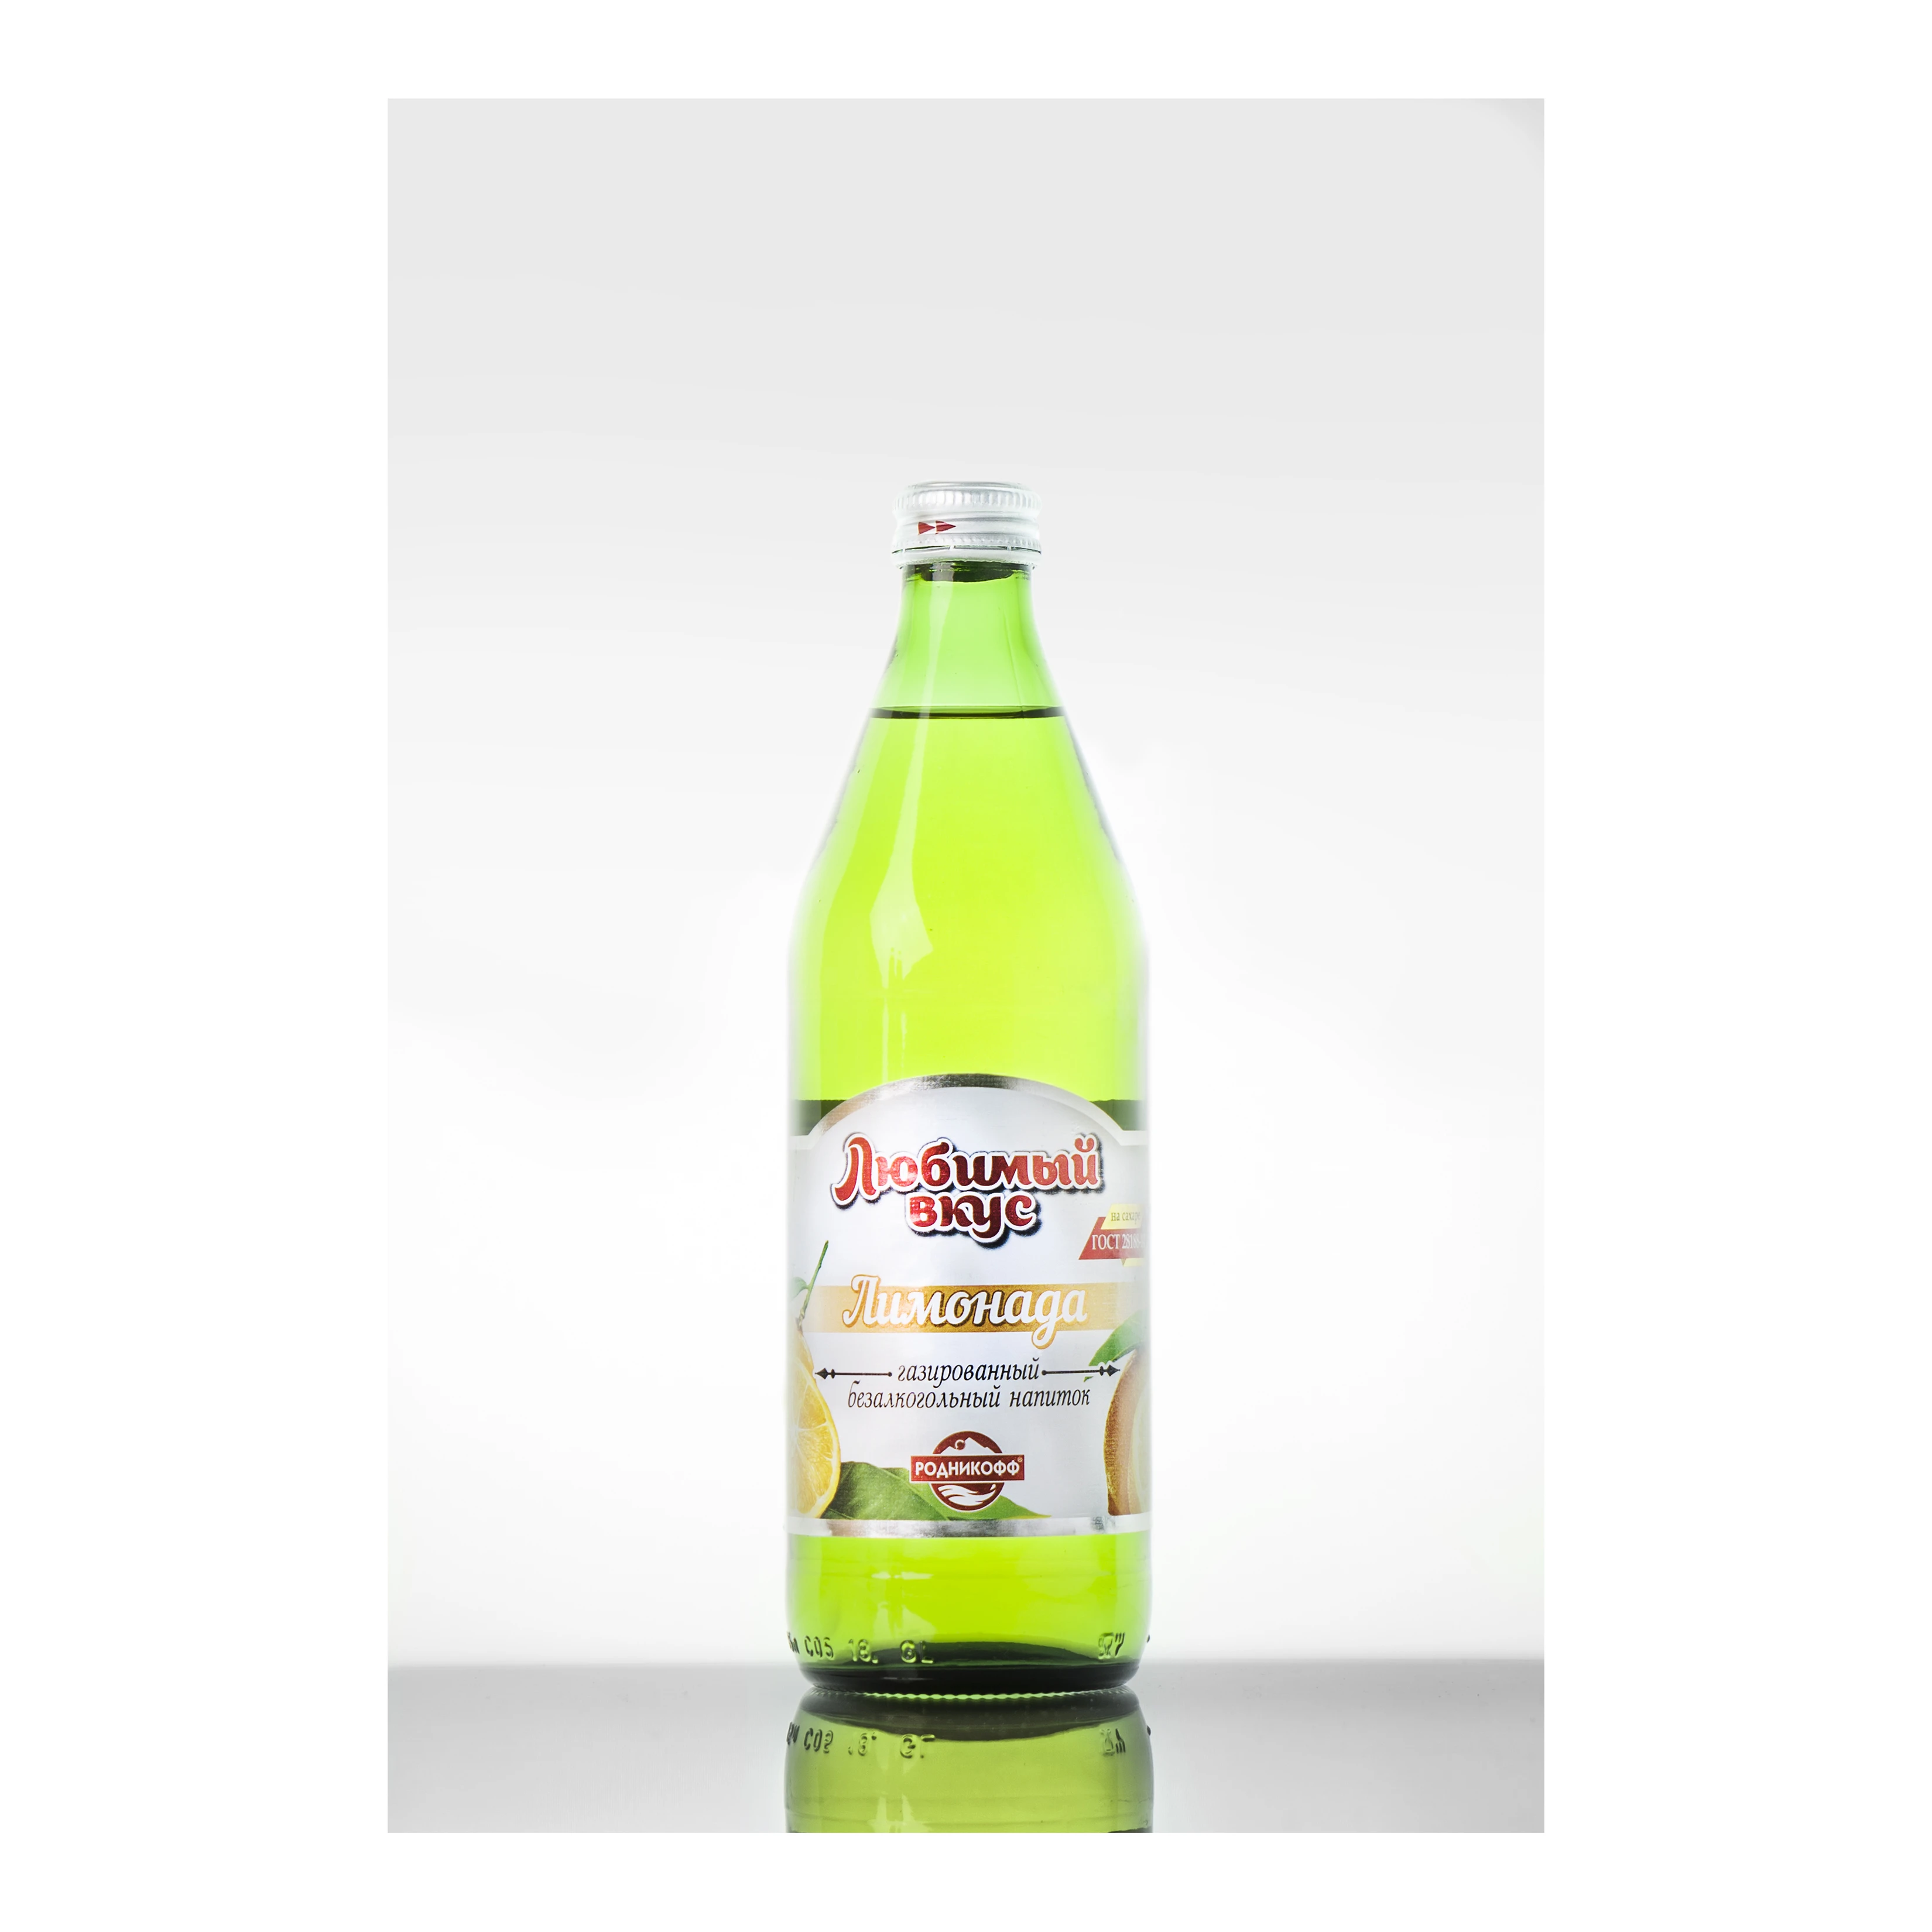 High quality carbonated drink 500ml glass bottle, wholesale drinks